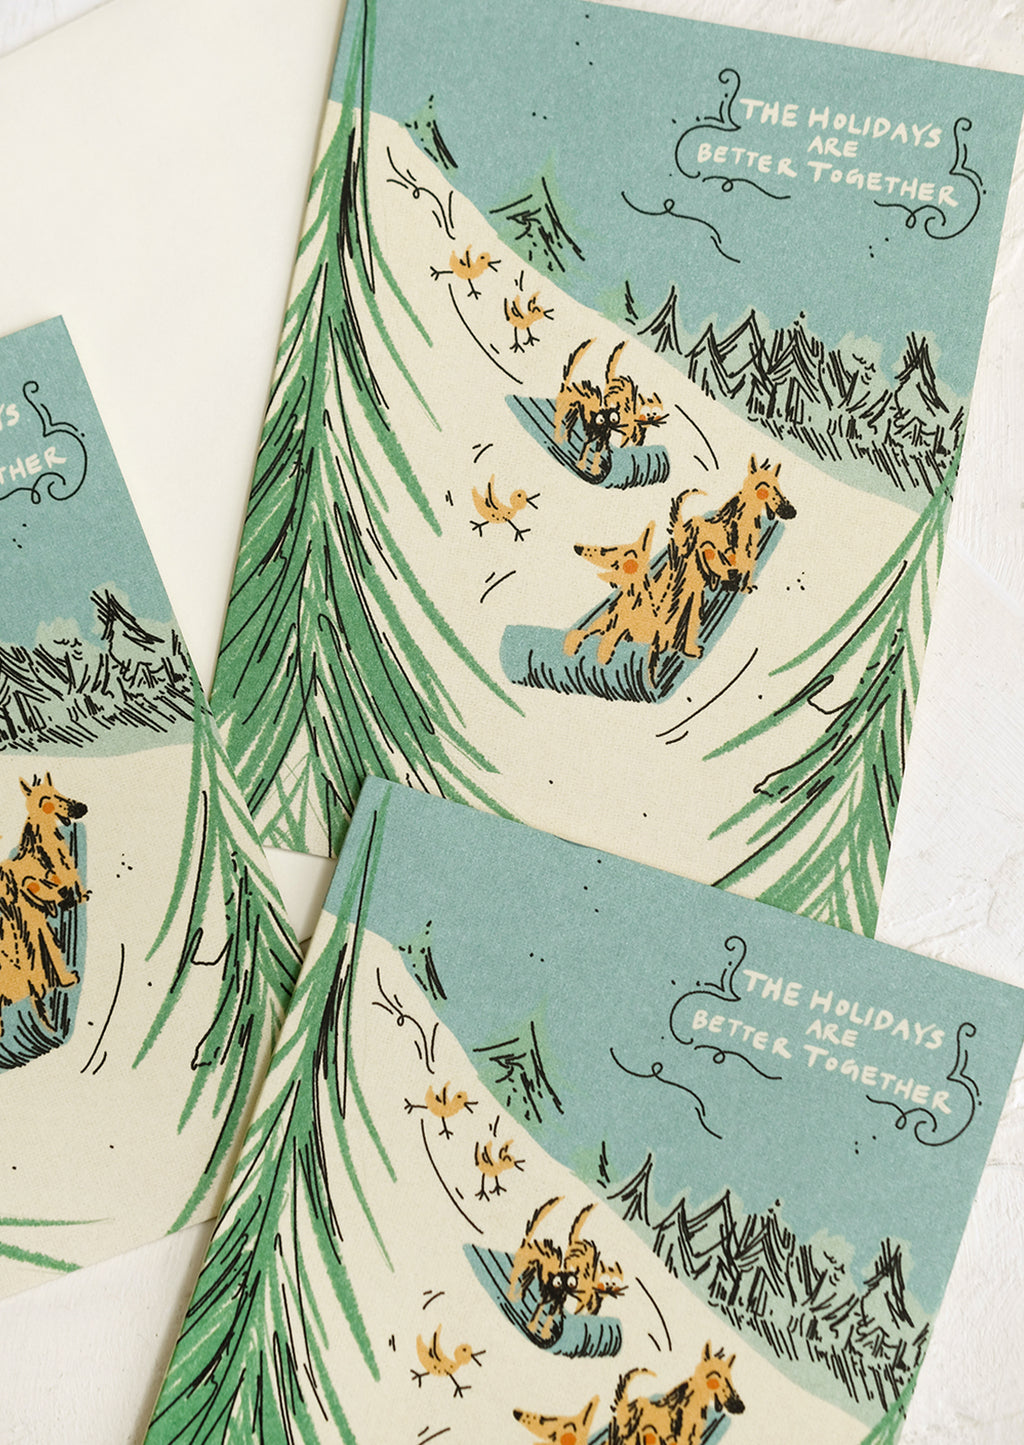 1: Greeting cards with illustration of dogs sledding down a hill, text reads "The Holidays Are Better Together".